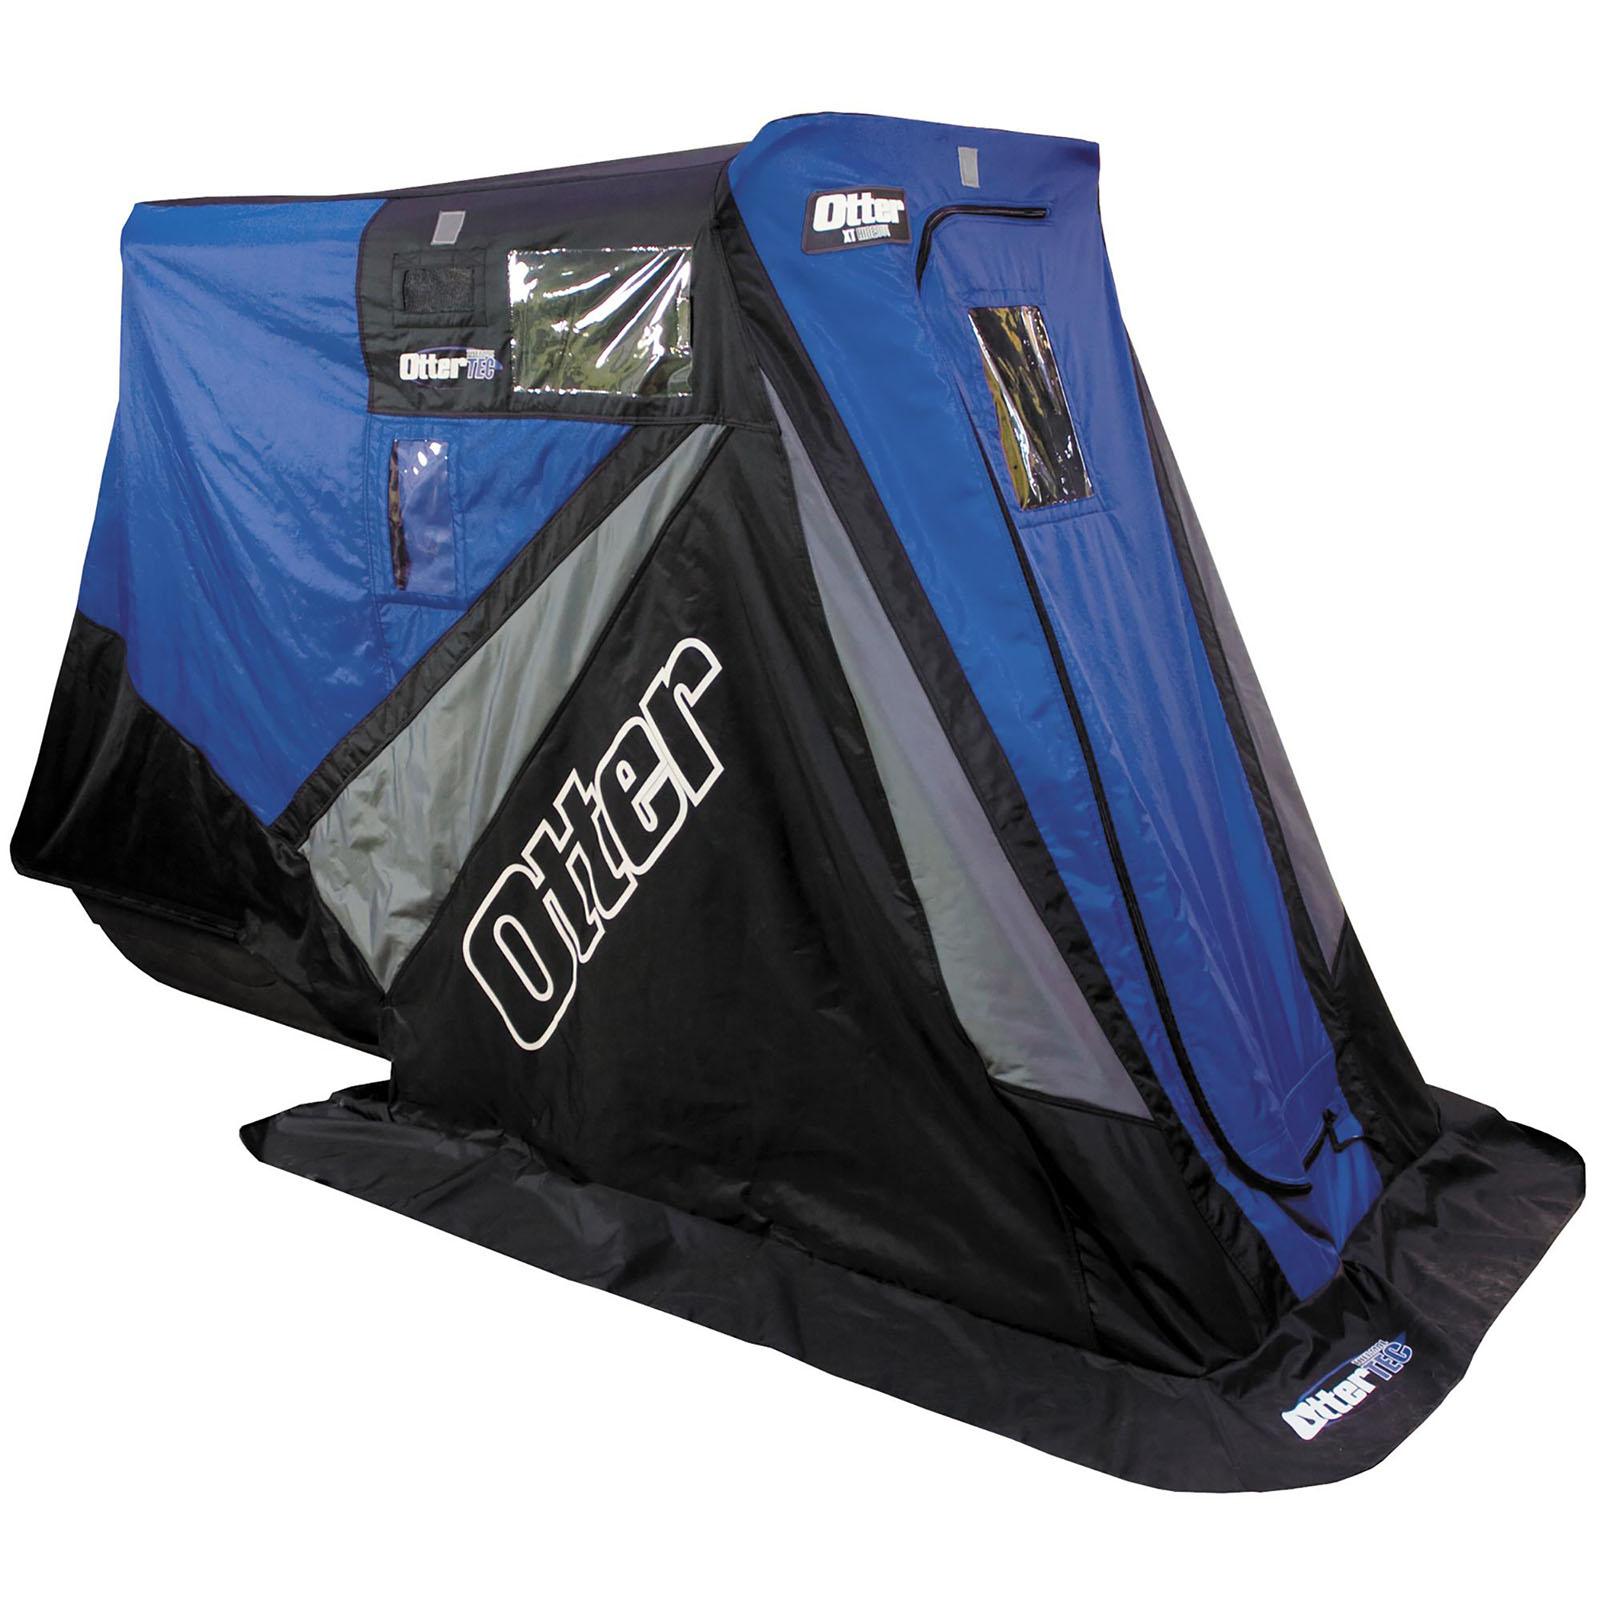 Hot Sell - Never Miss Otter Outdoors XT Hideout Ice Shelter Sale On Discount